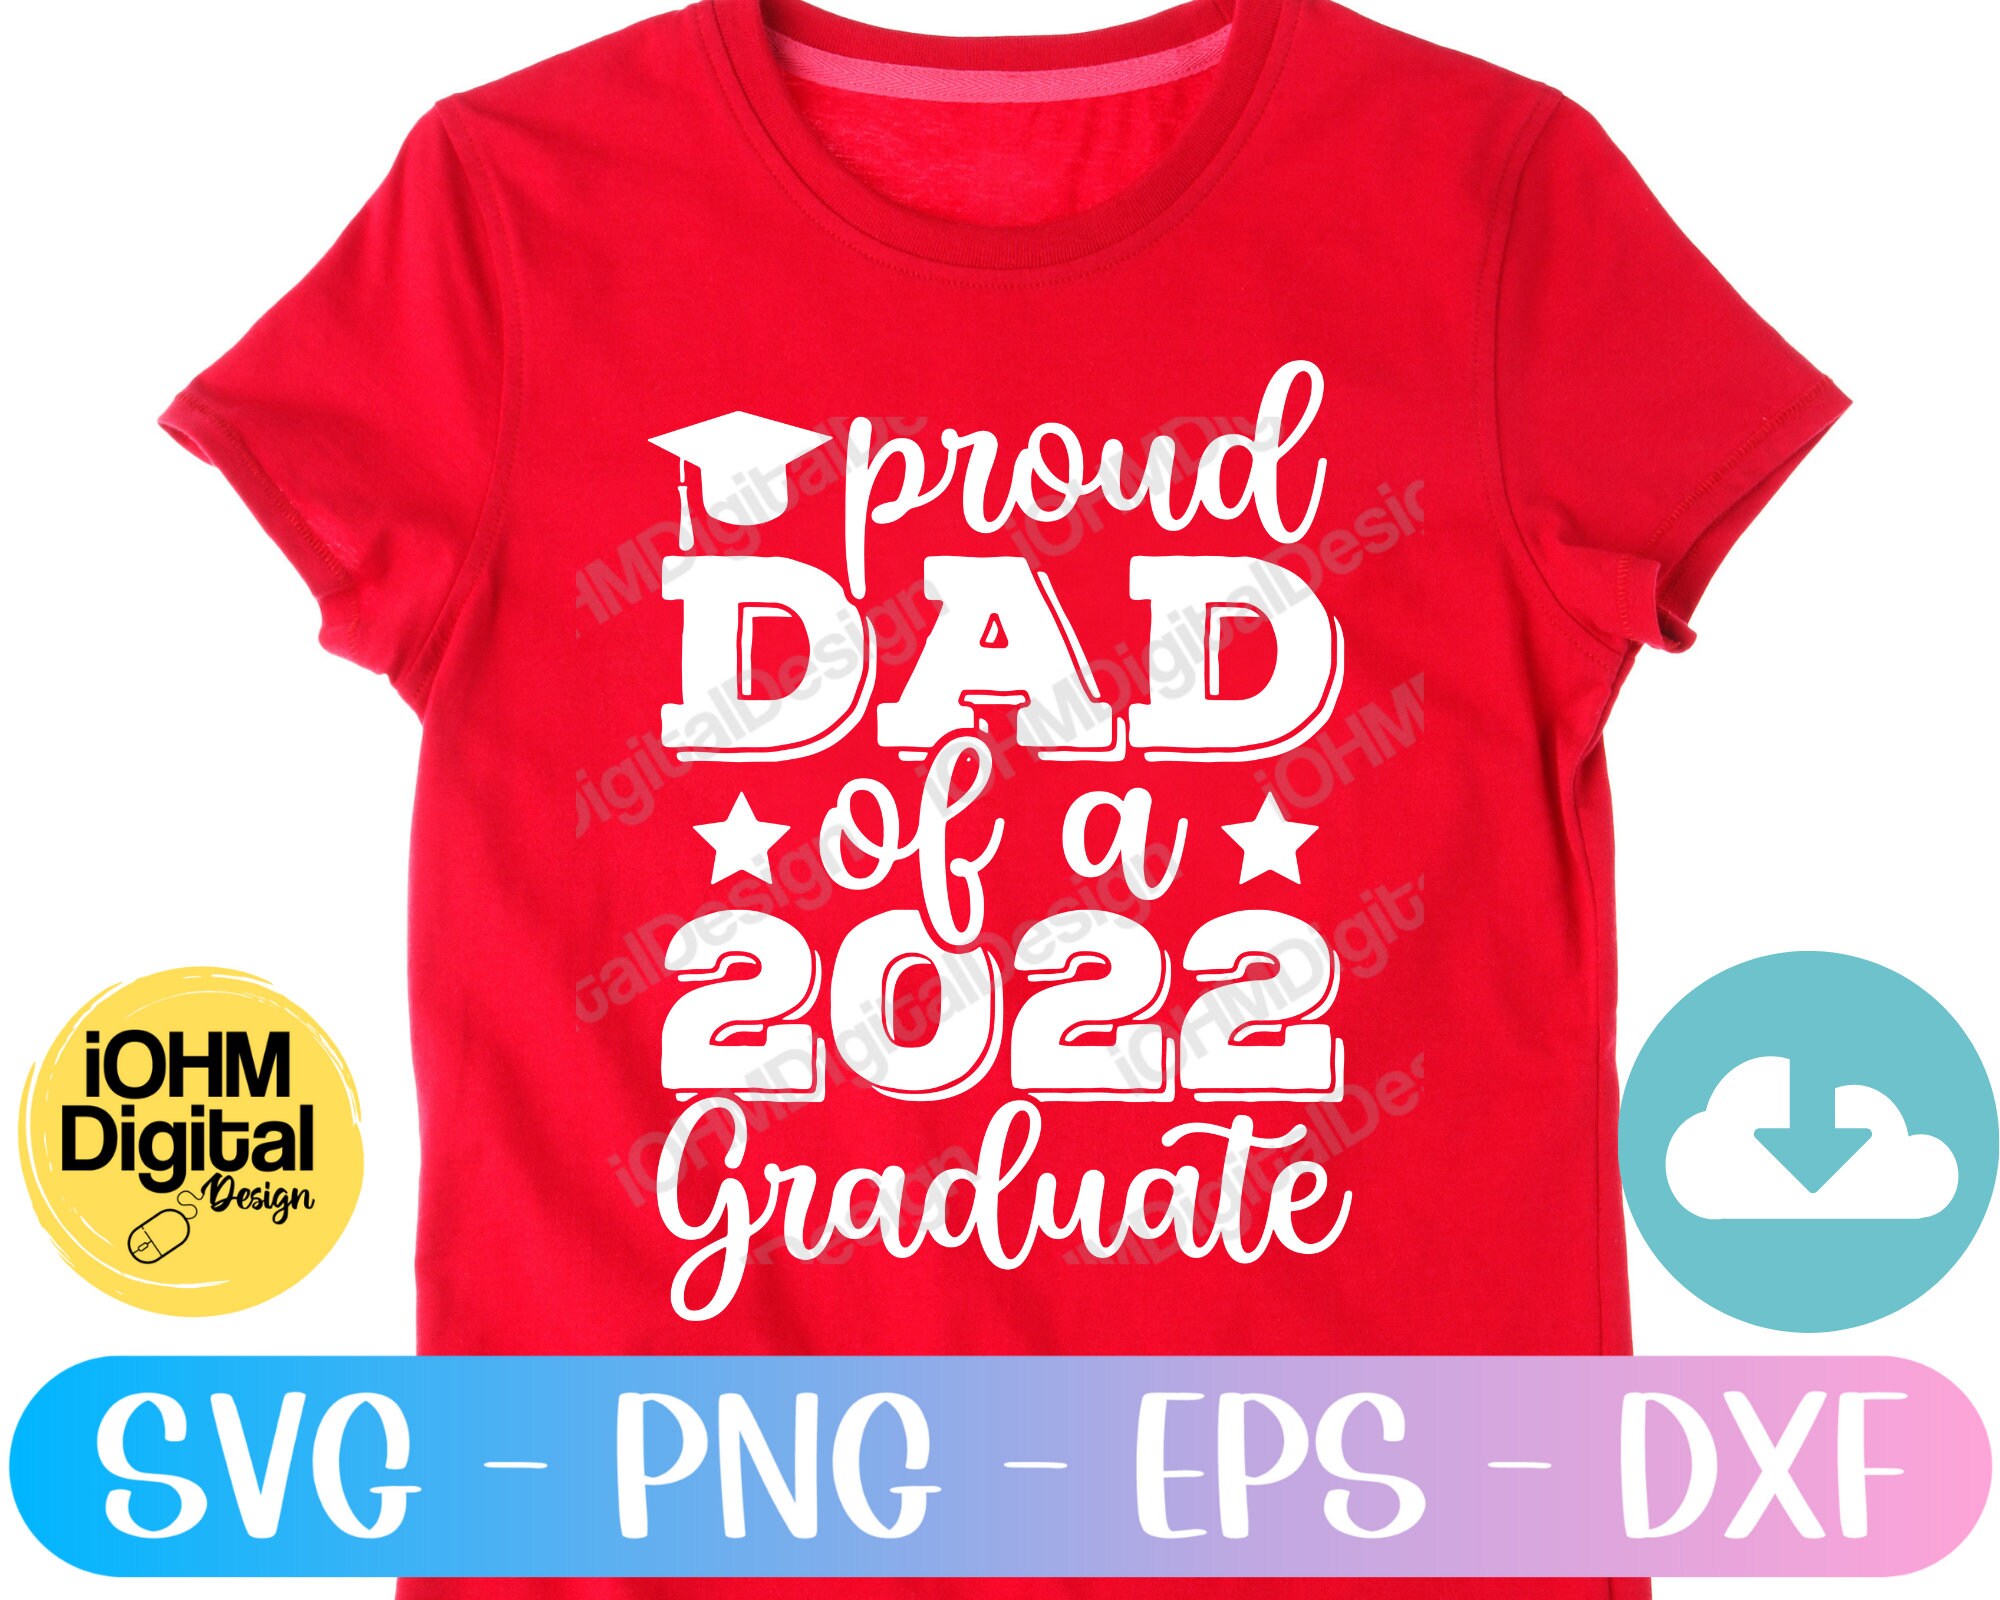 Proud Dad of A 2022 Graduate Svg Png Eps Dxf Cut File Class - Etsy